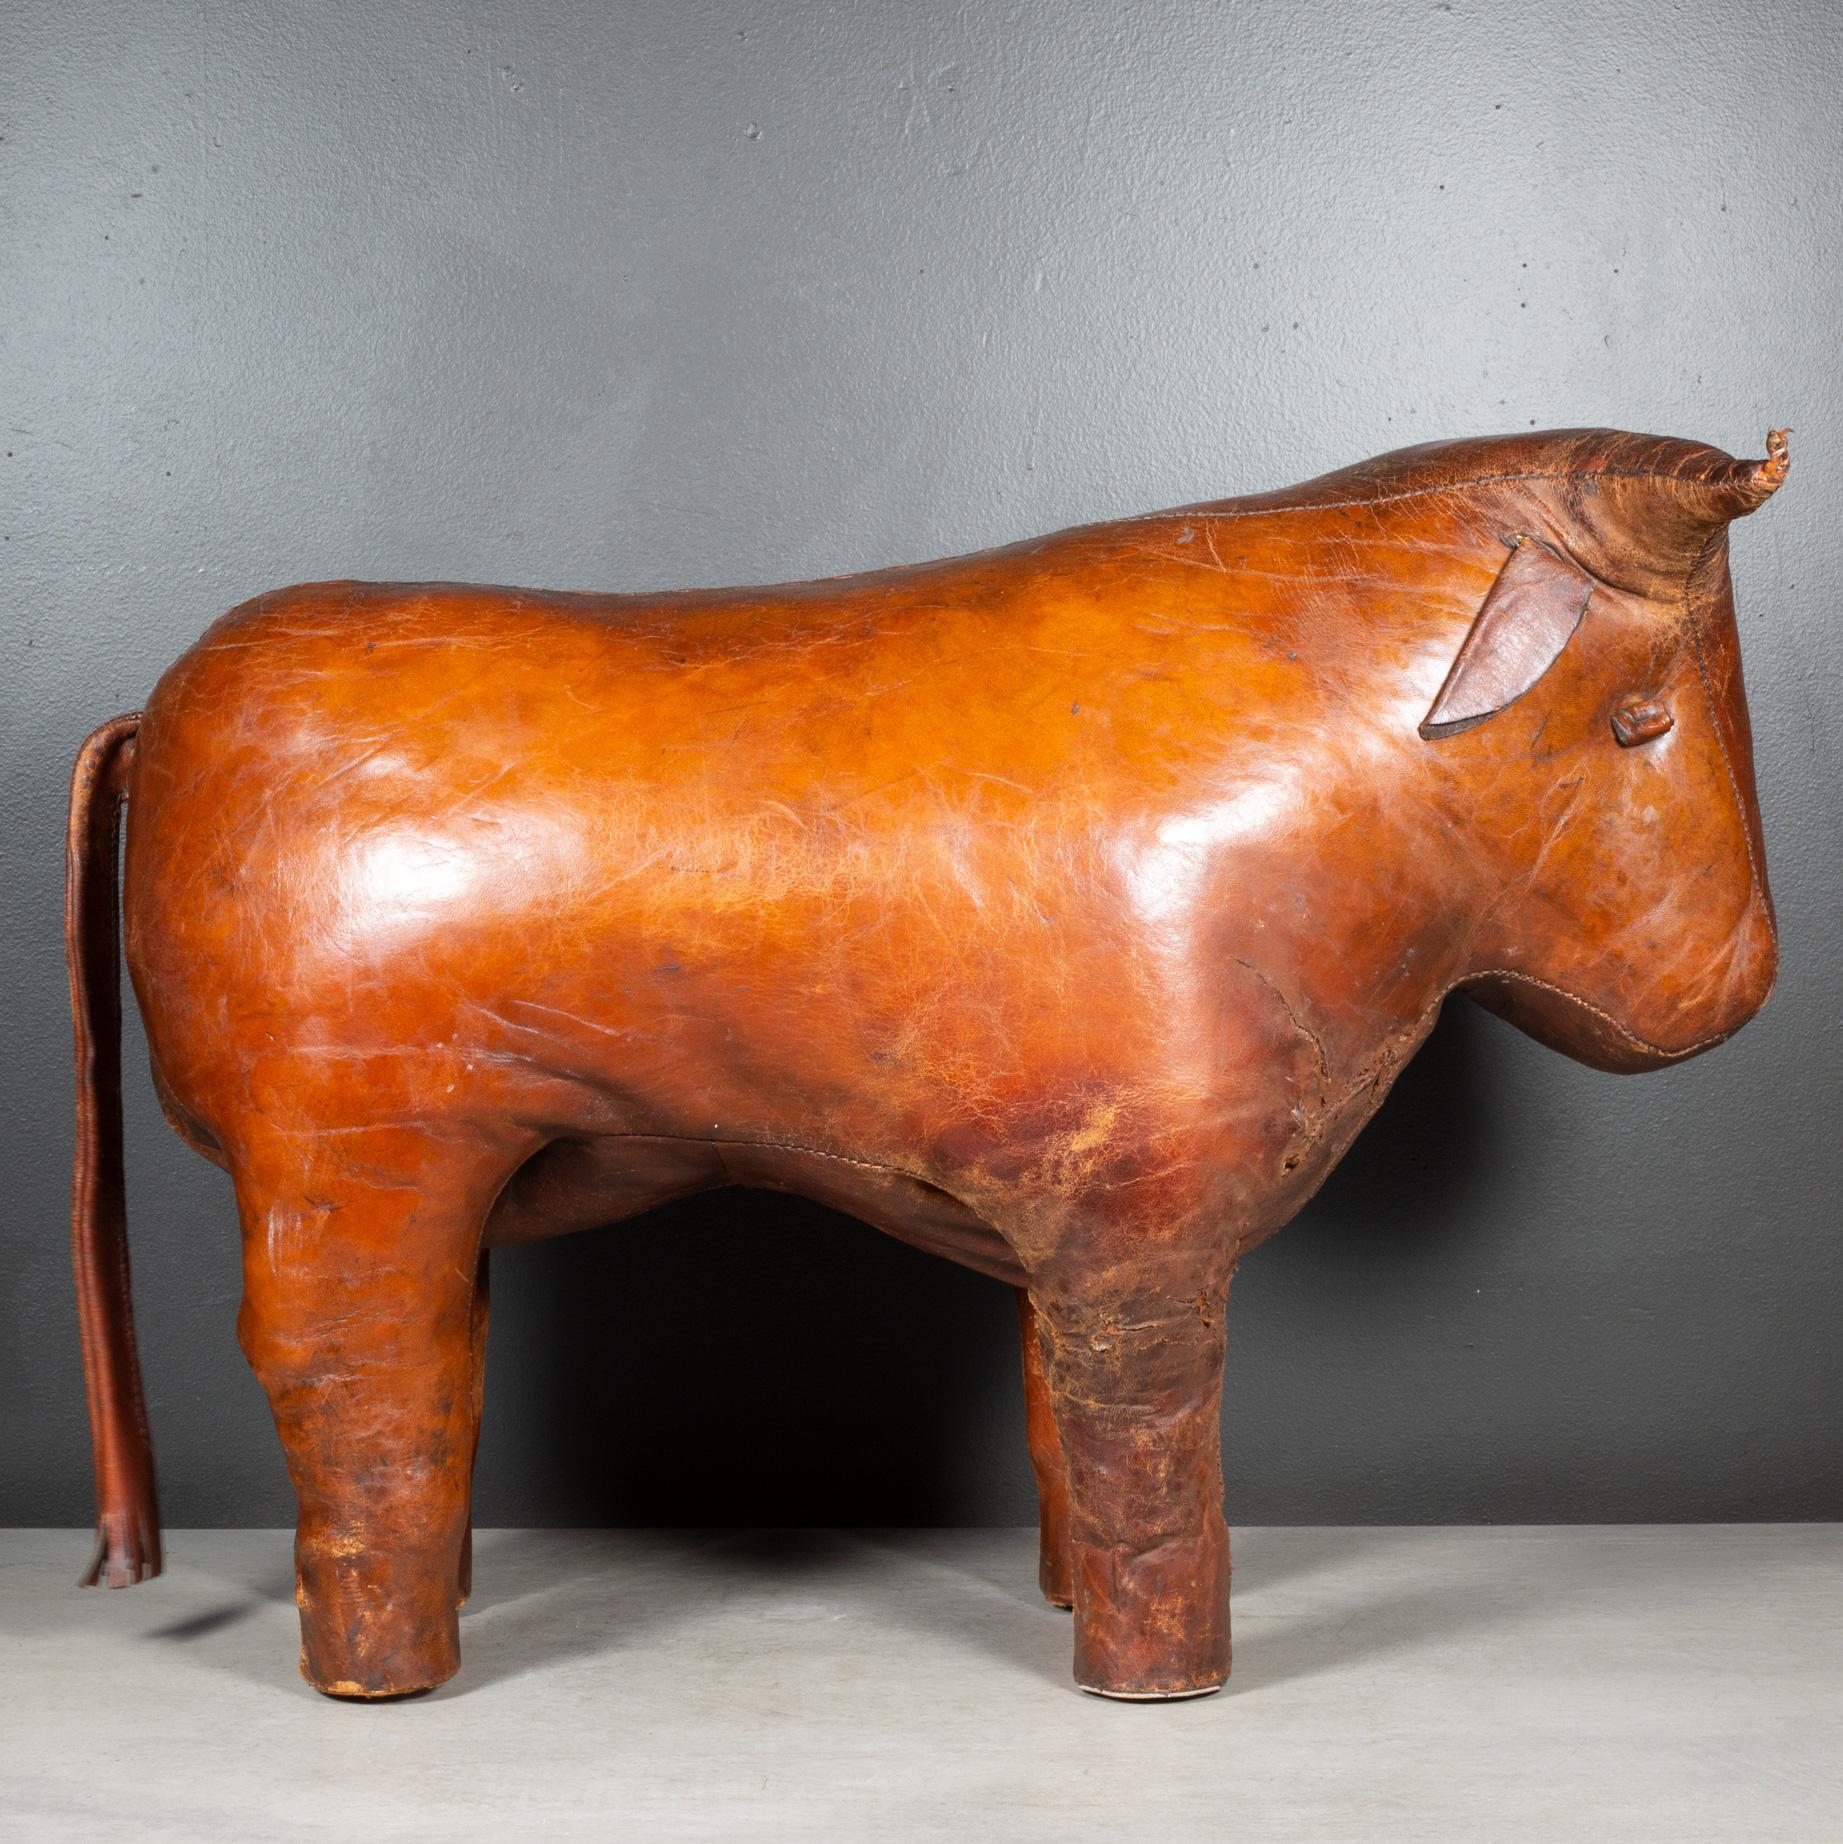 20th Century Large Dimitri Omersa for Abercrombie & Fitch Leather Bull Footstool/Ottoman c.19